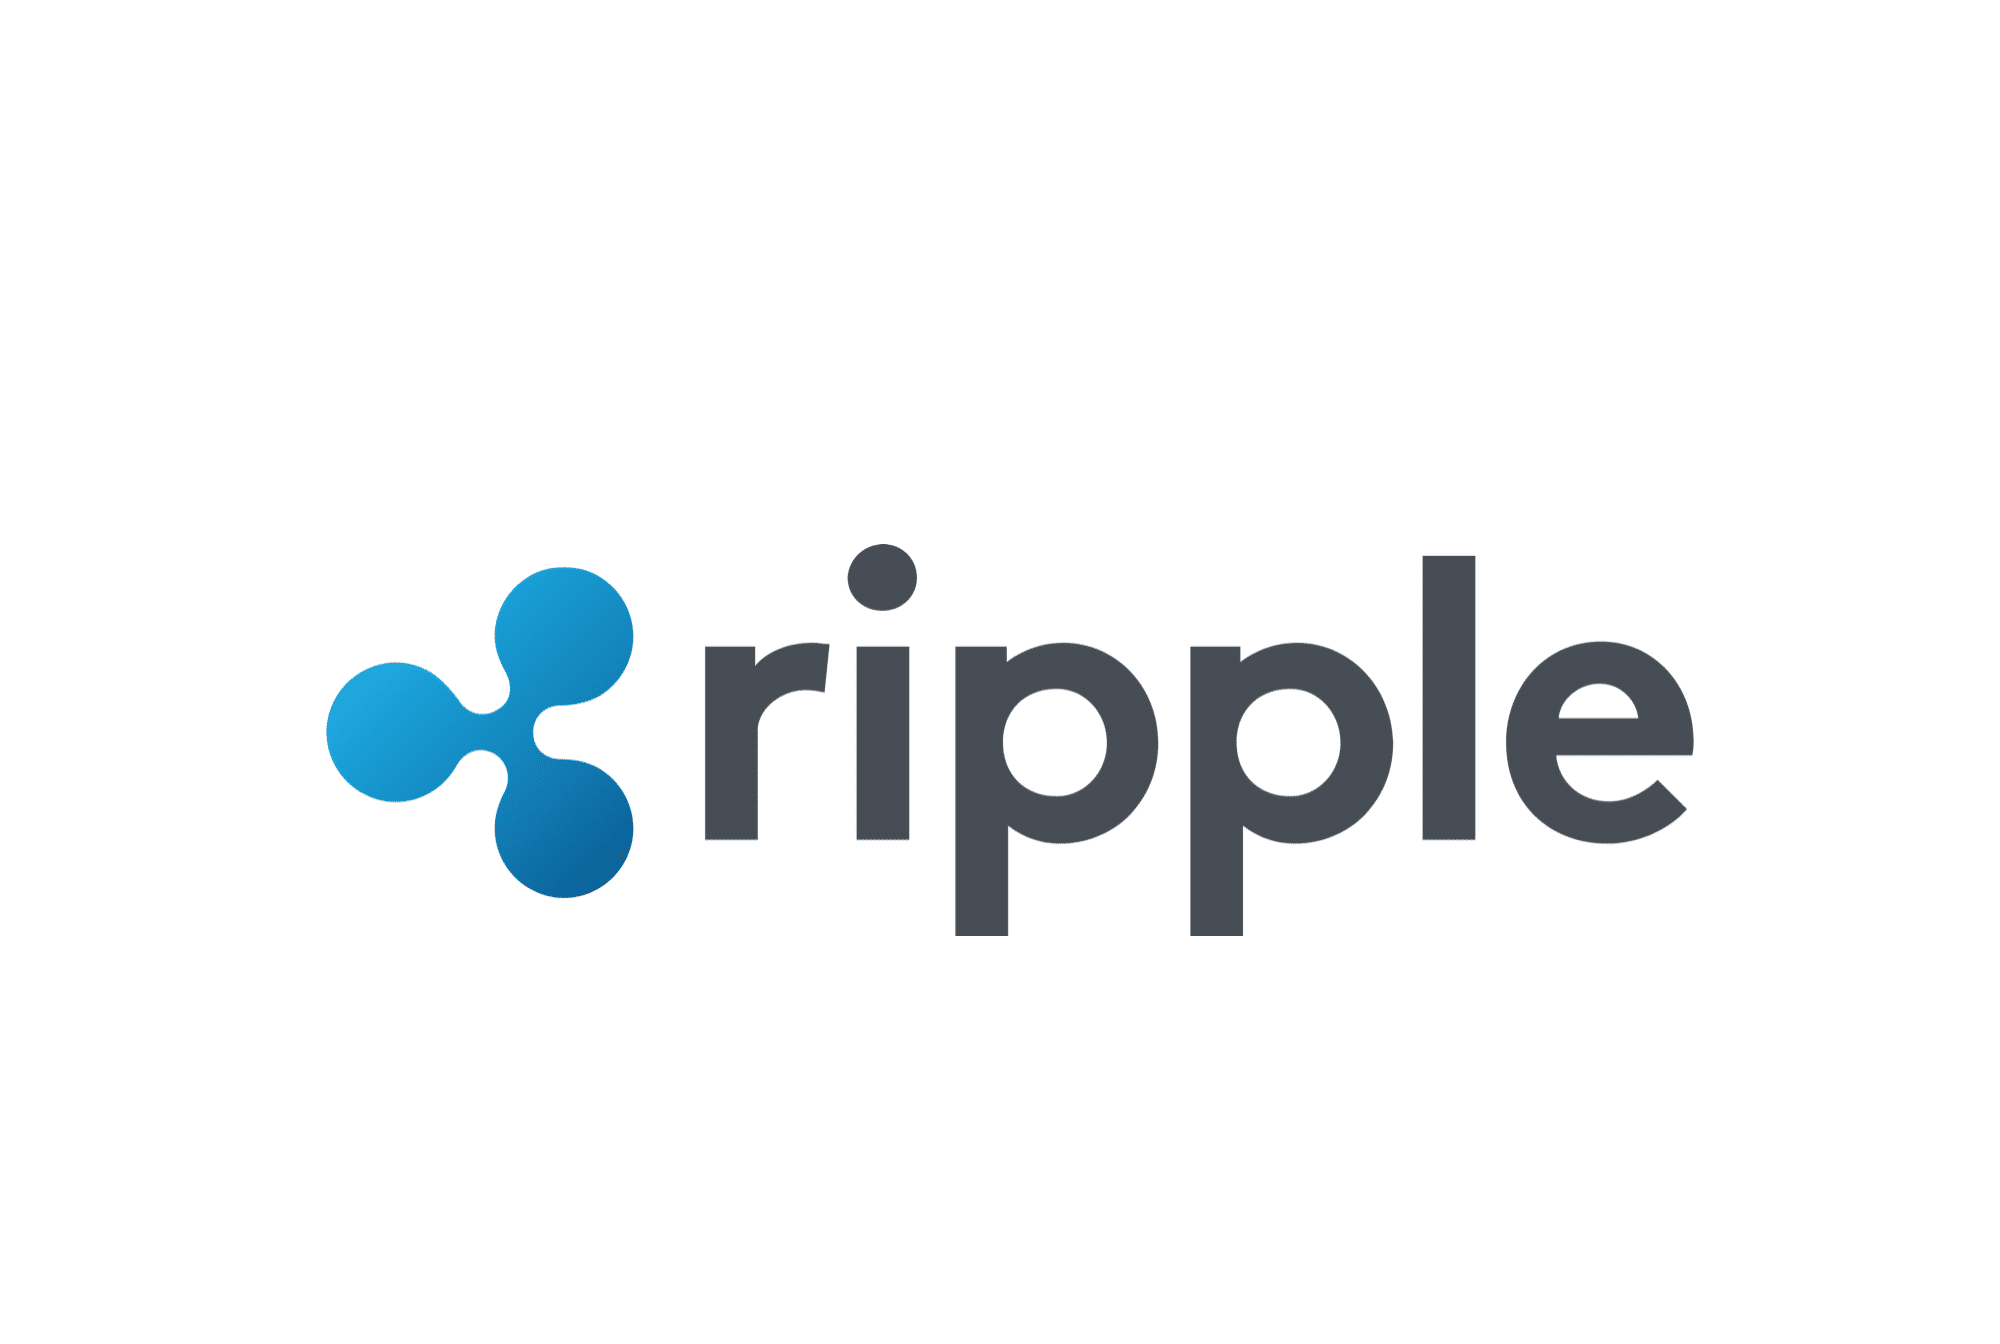 Ripple (XRP) Price: Can The Cryptocurrency Explode Like Bitcoin?